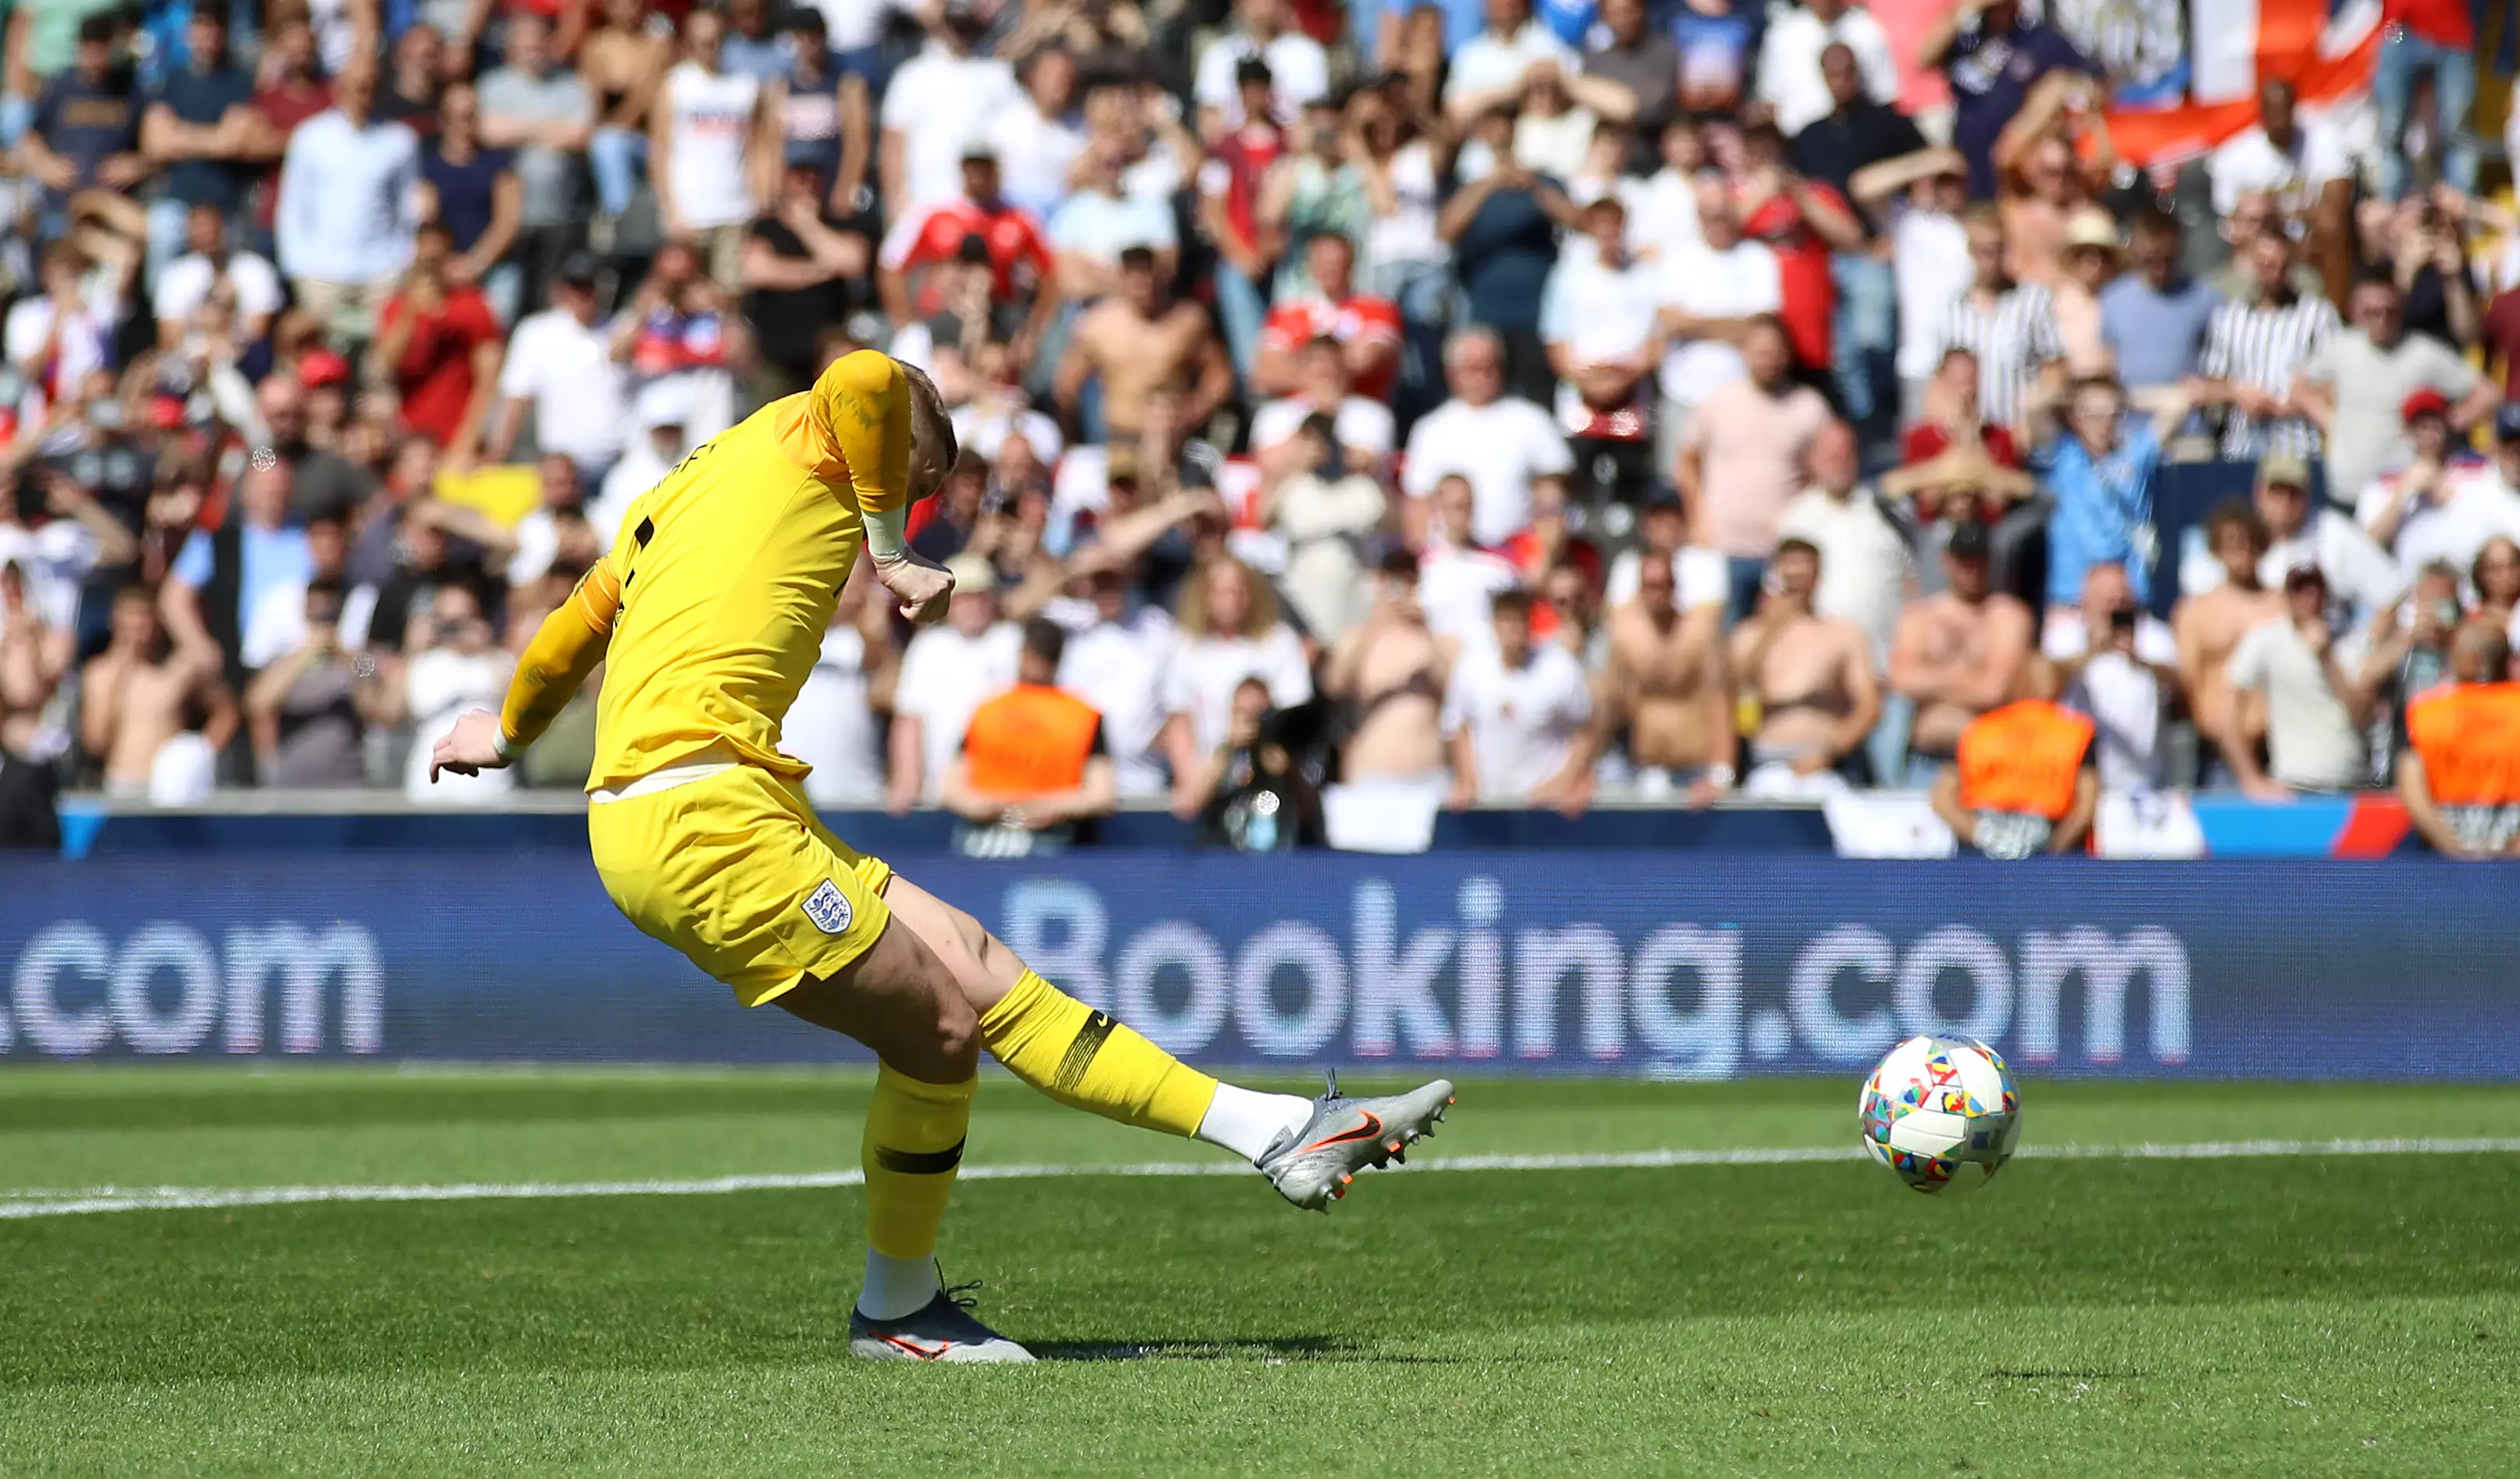 Jordan Pickford could take a penalty against Germany on Tuesday. Image credit: PA